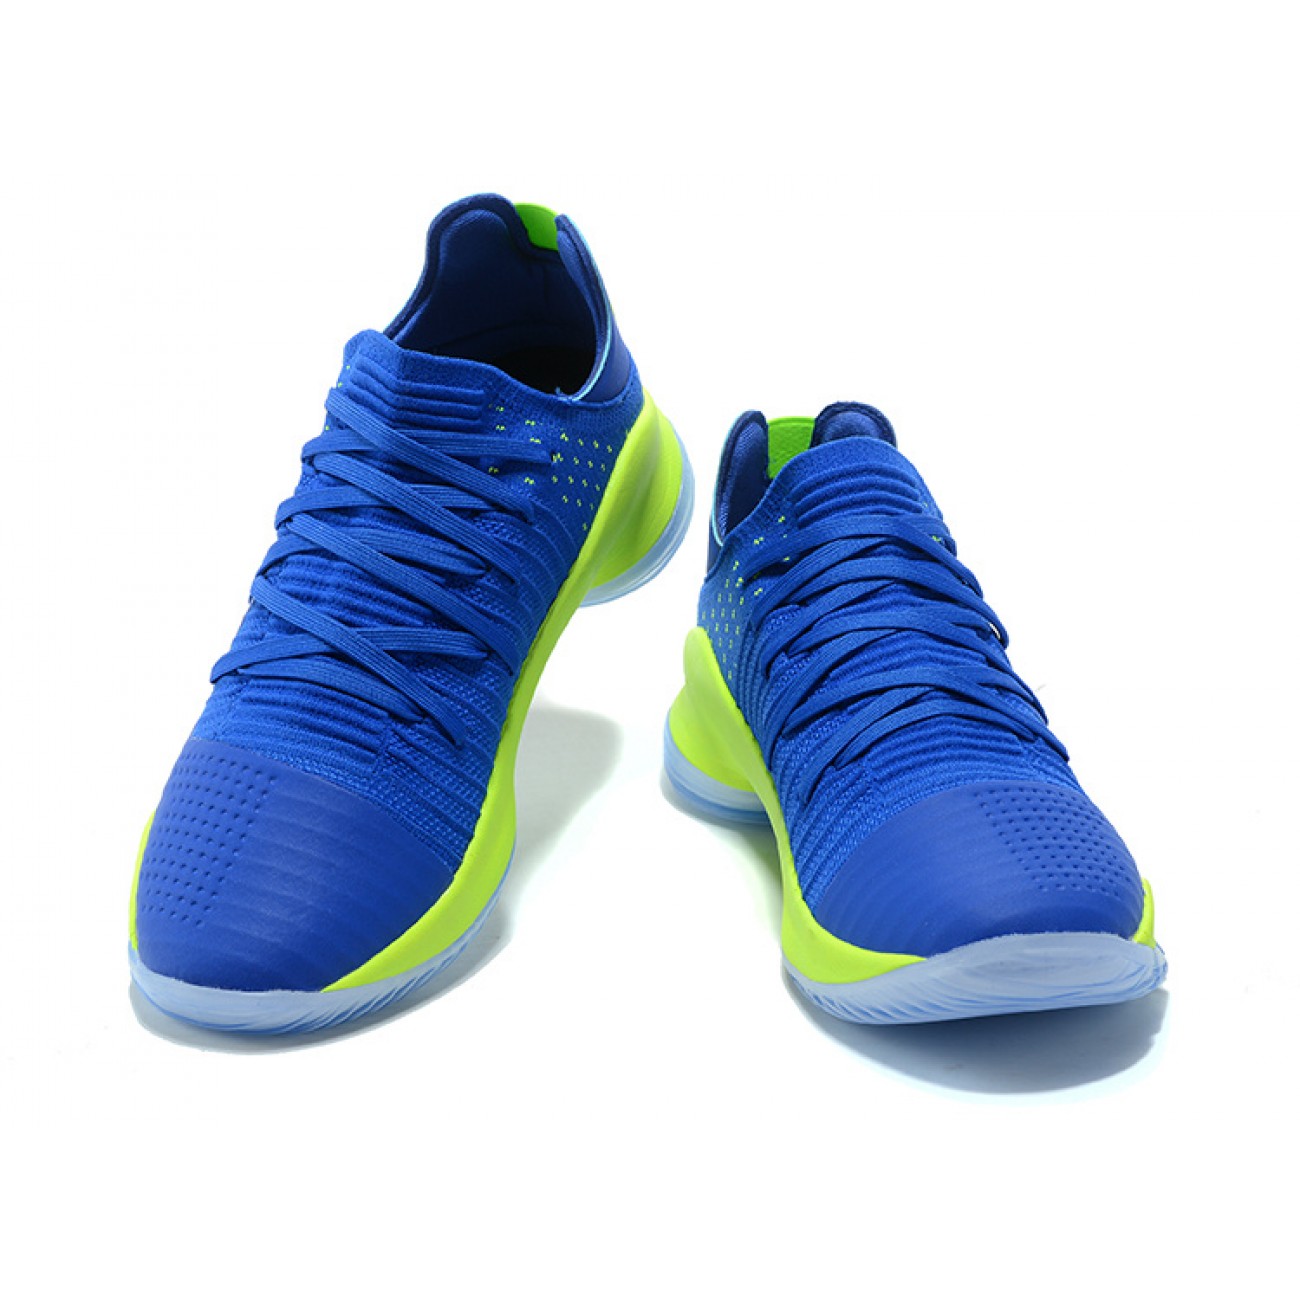 Under Armour UA Curry 4 Low Blue/Green